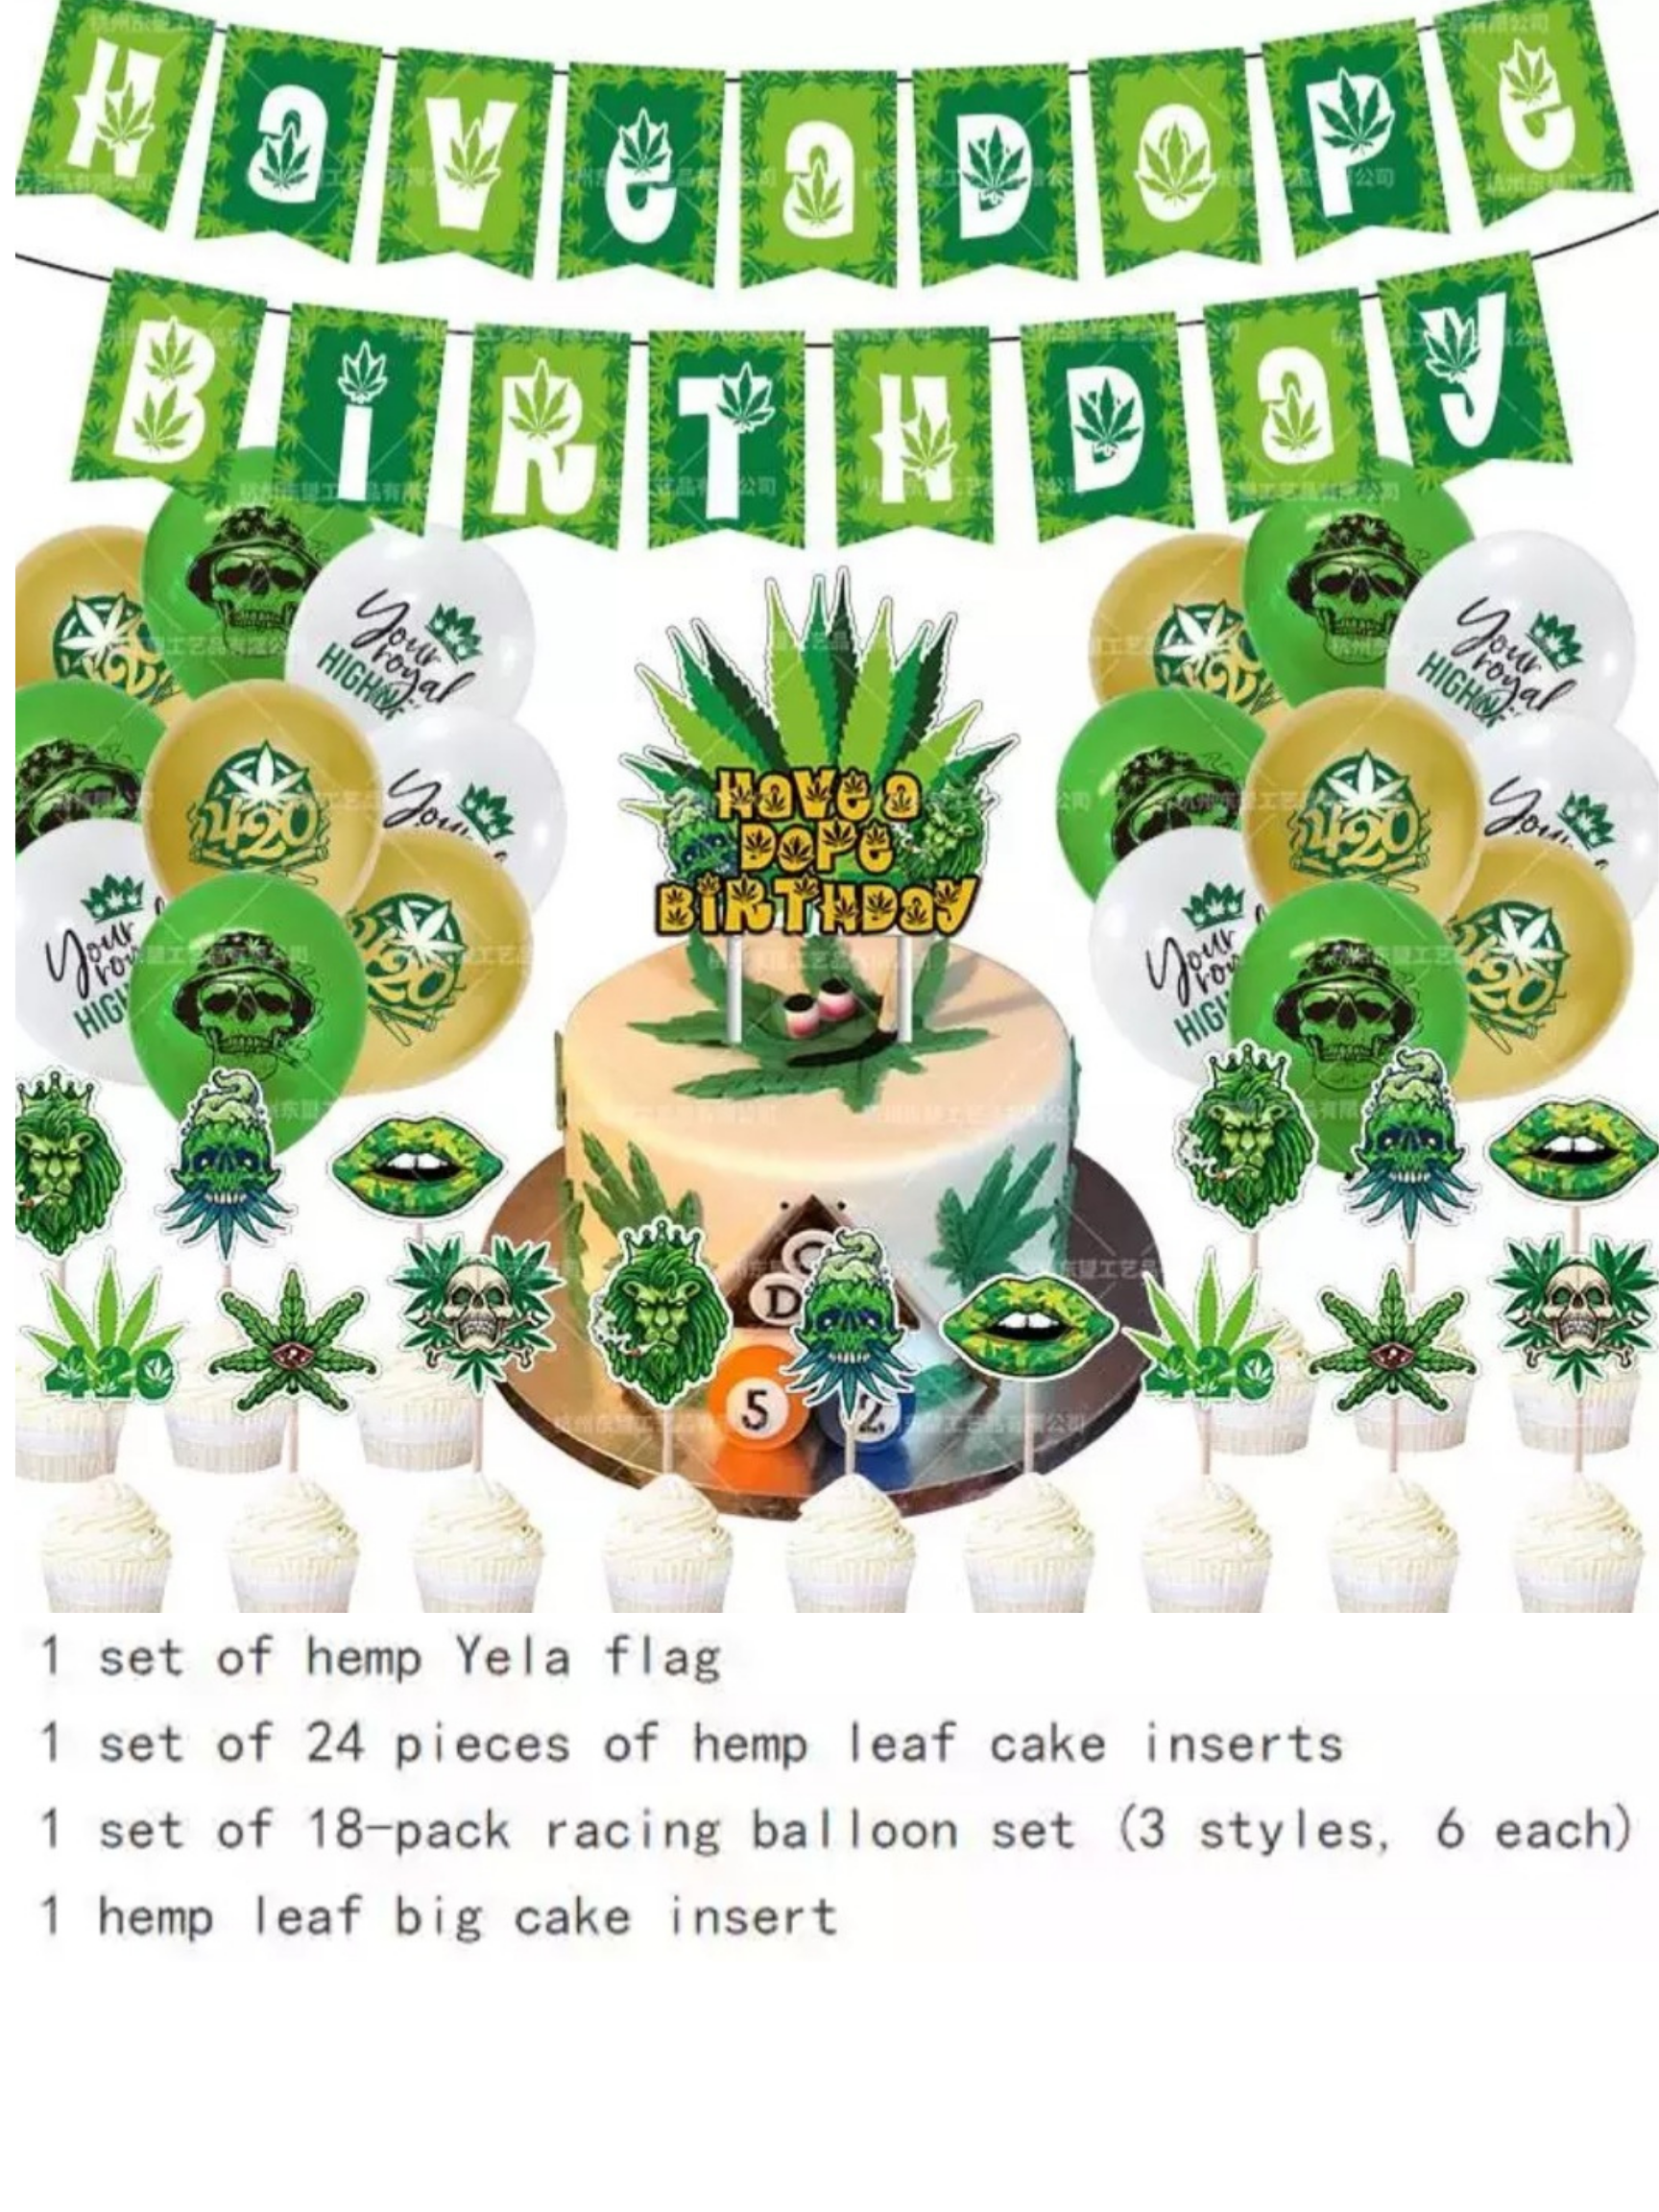 Have a Dope Happy Birthday, Royal Highness 420 Weed Birthday Decor with Balloons - Queen of the Castle Emporium